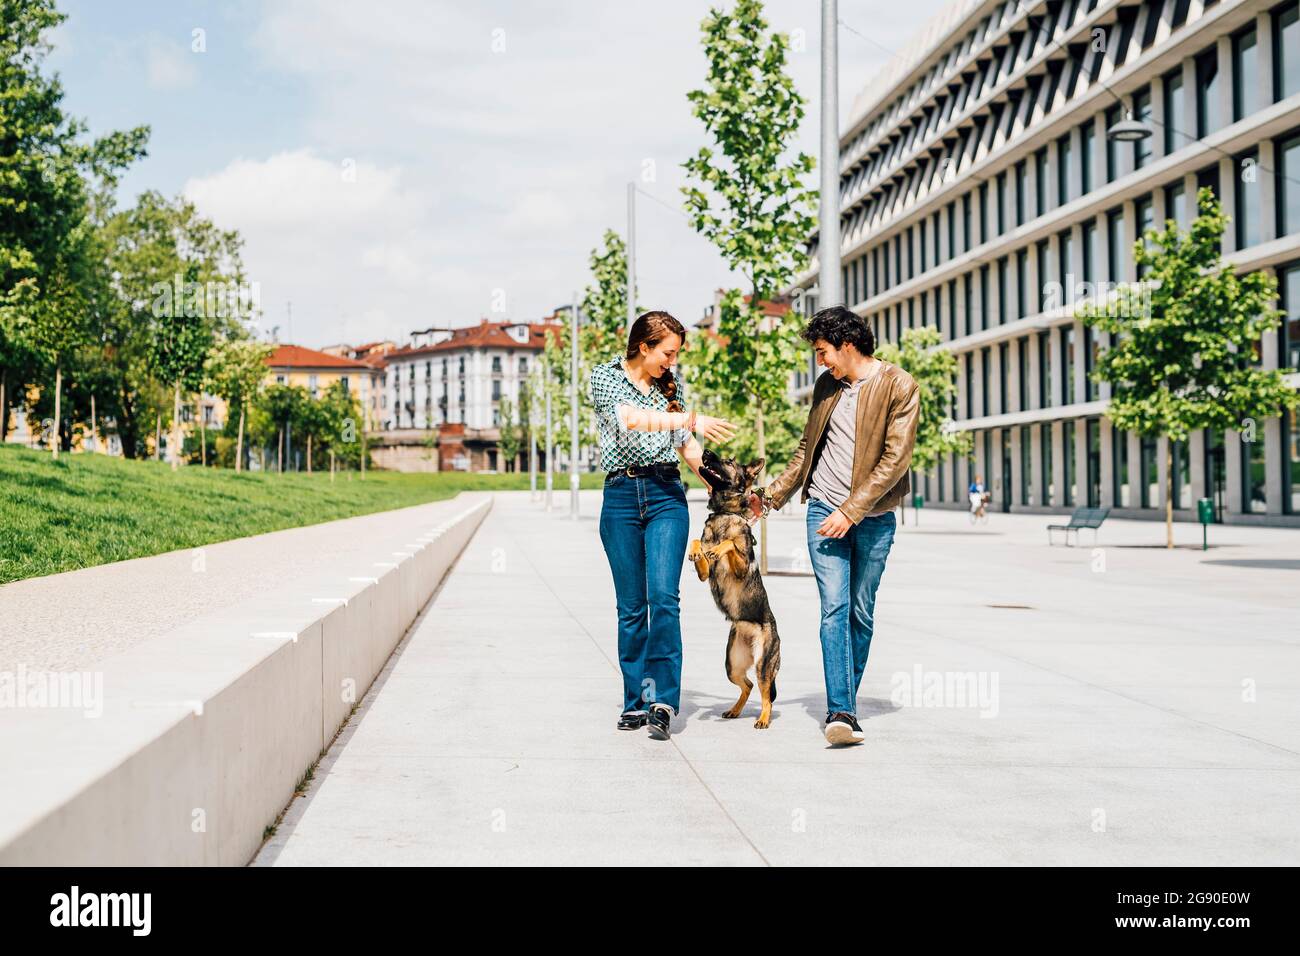 Couple playing with dog while walking on city street Stock Photo